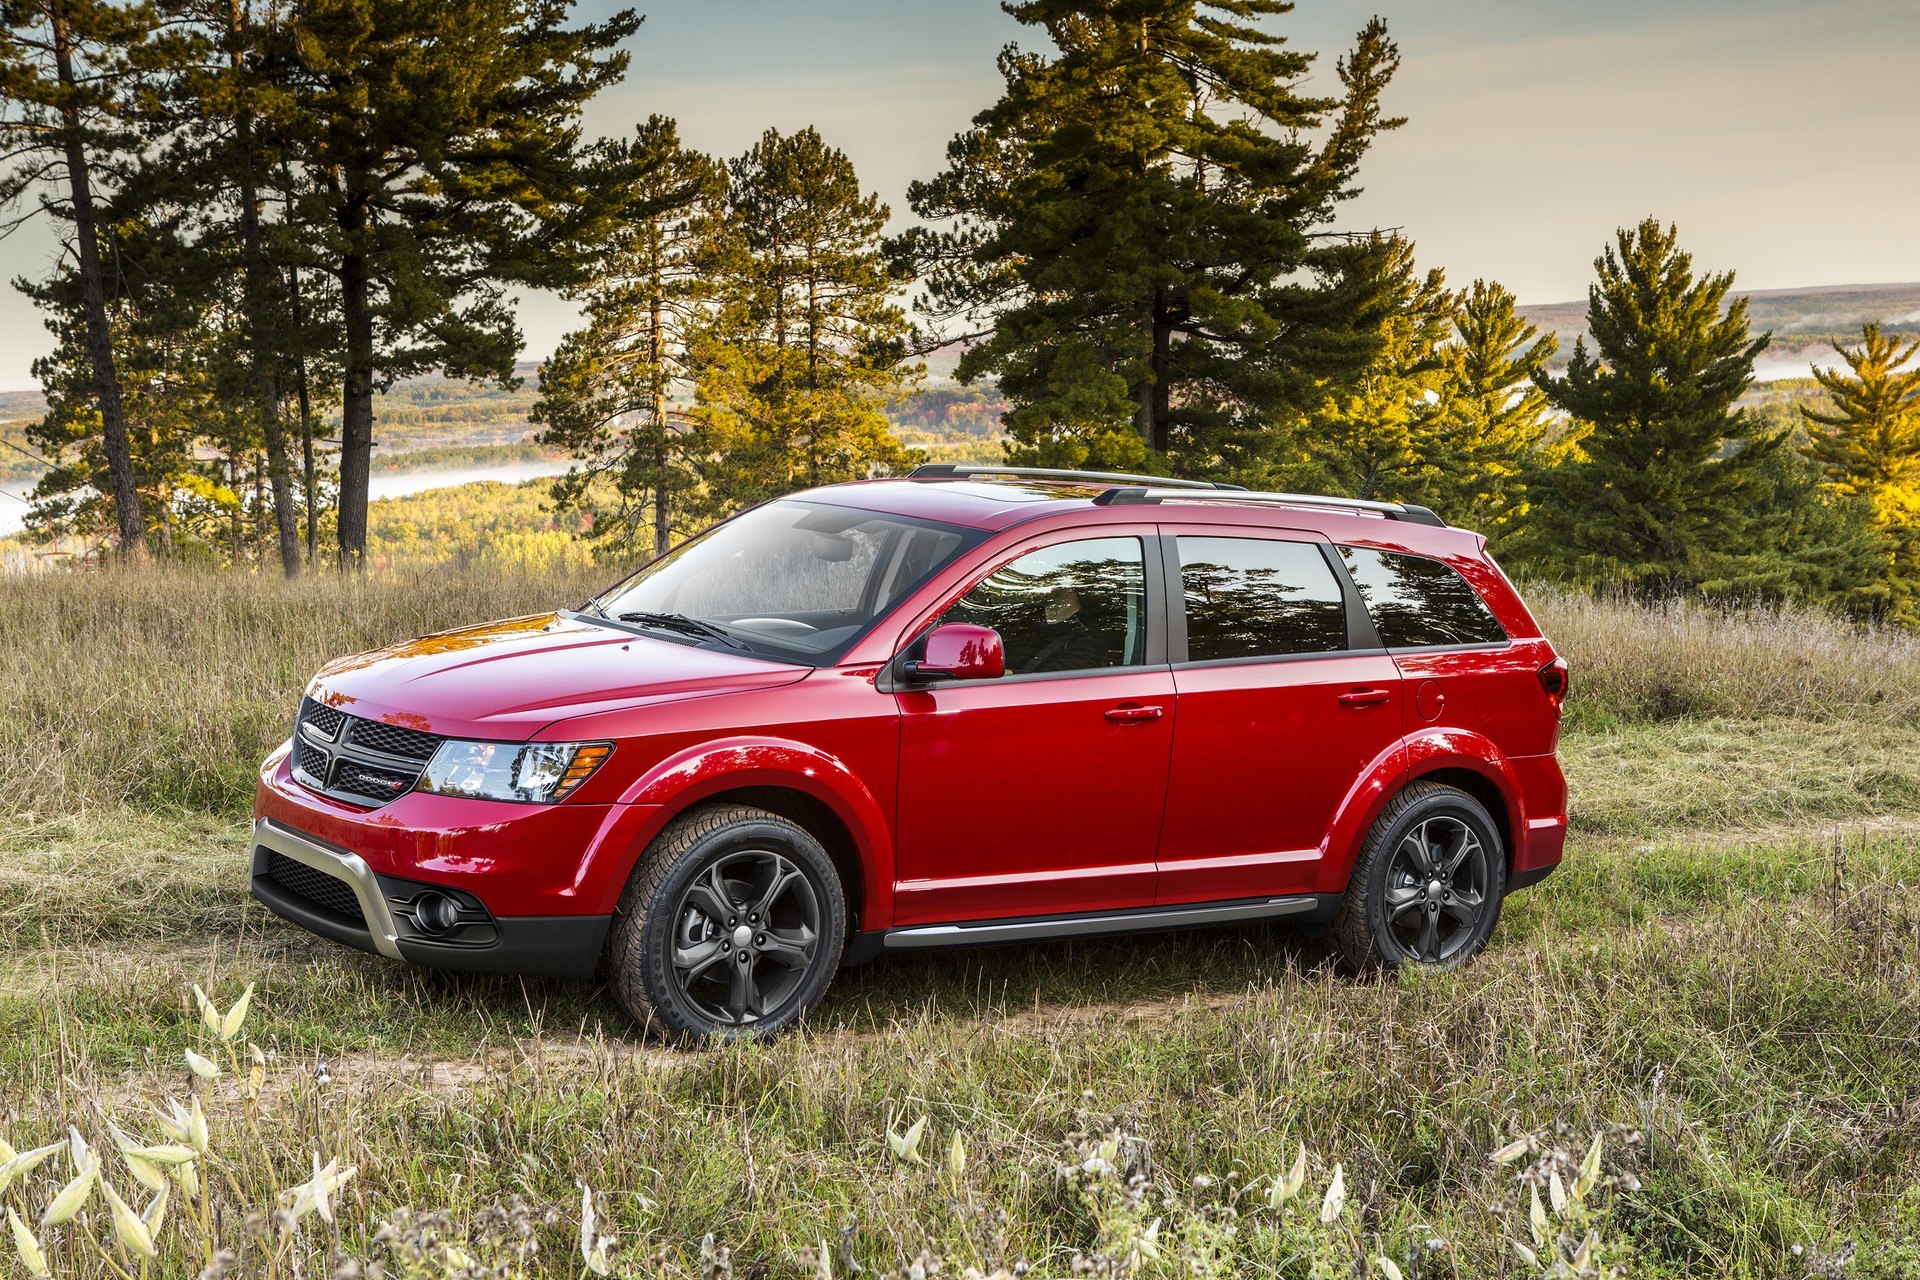 2015 dodge journey engine replacement cost